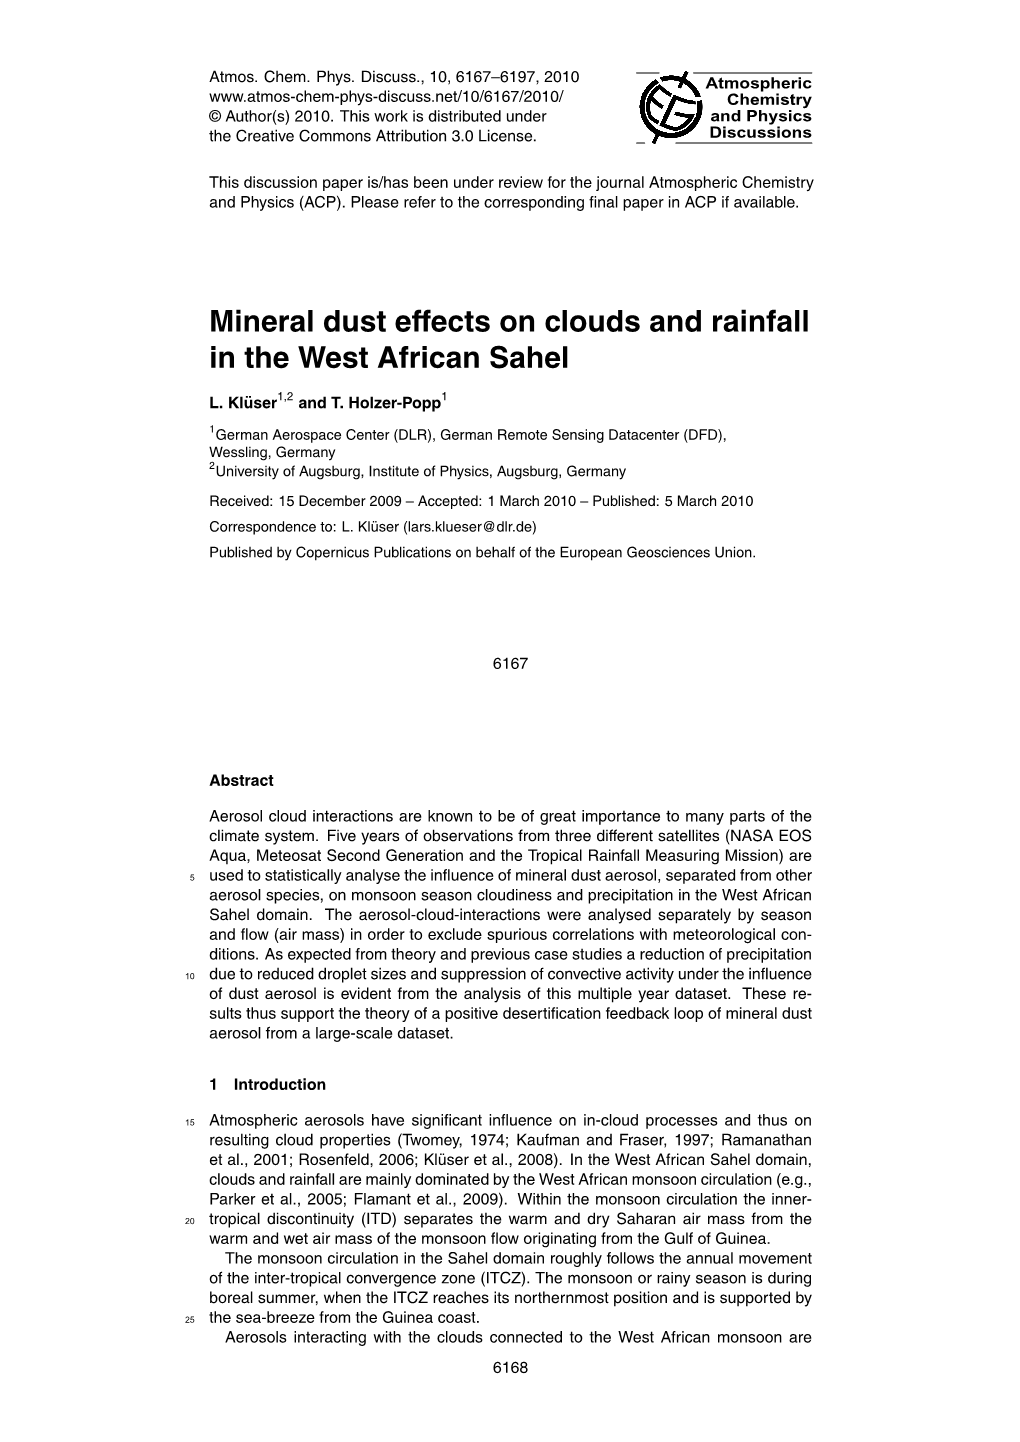 Mineral Dust Effects on Clouds and Rainfall in the West African Sahel